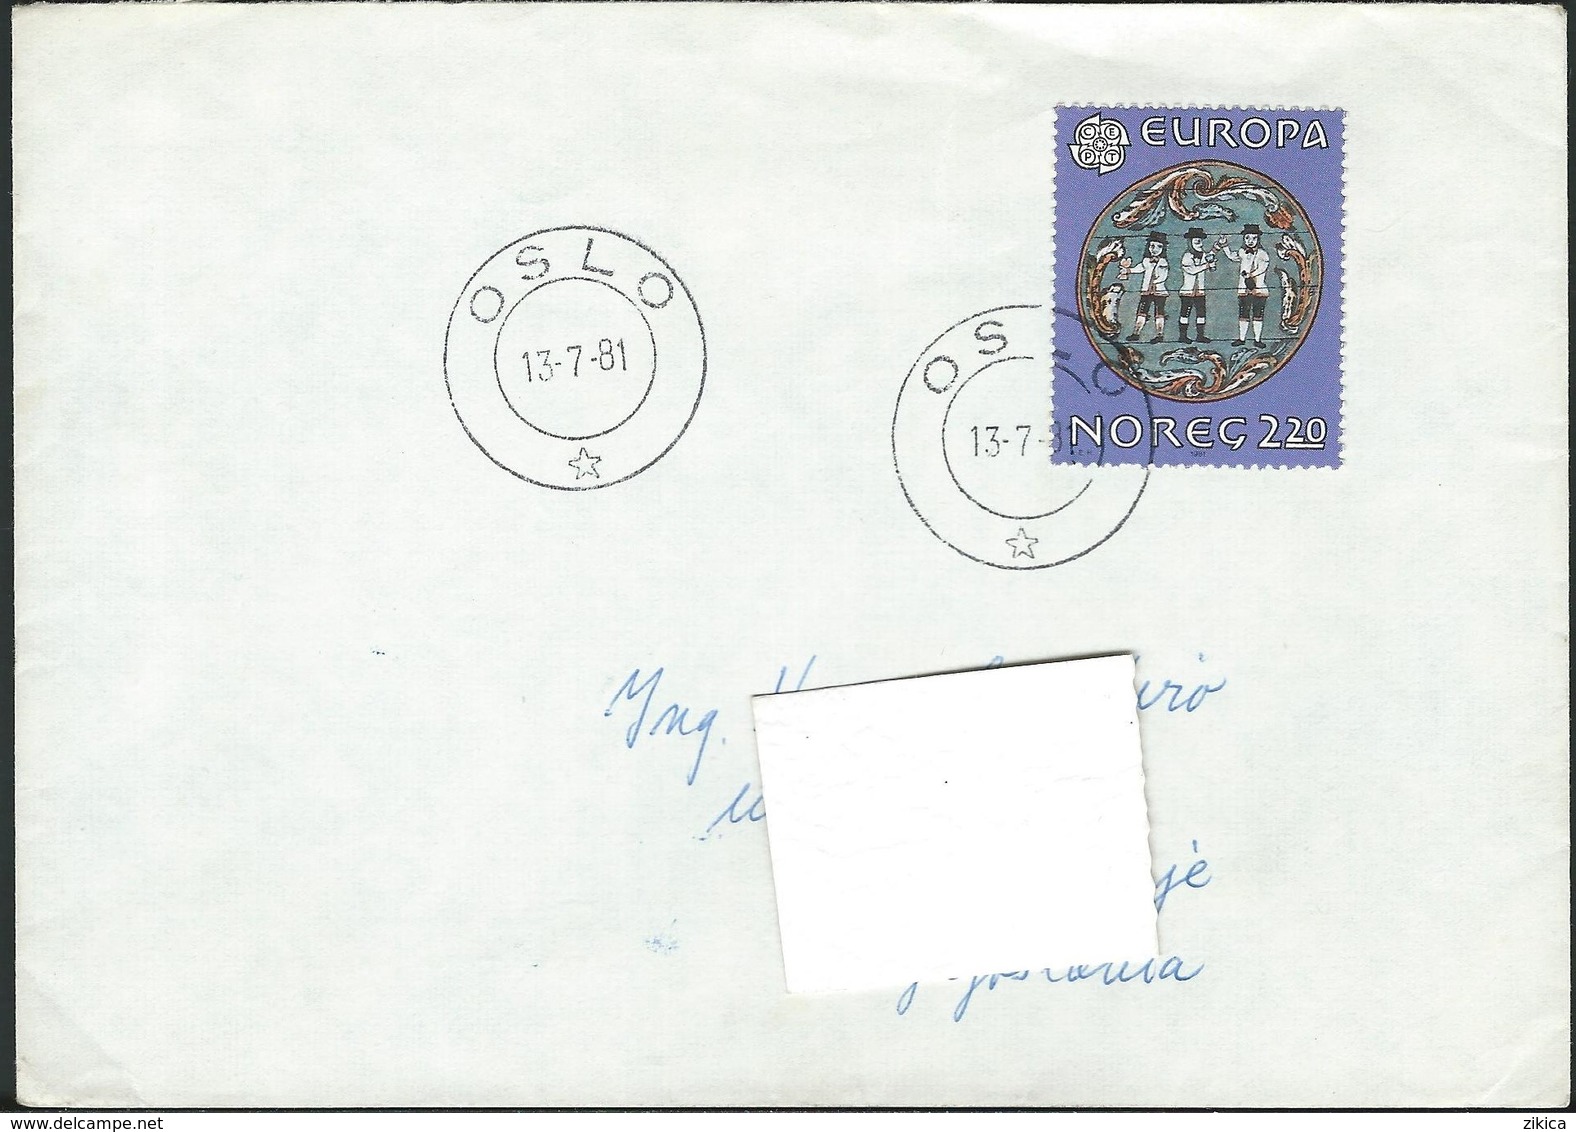 1981 Norway / Norge Letter Via Yugoslavia,Macedonia - Motive Stamp : 1981 EUROPA Stamps - Folklore - Covers & Documents